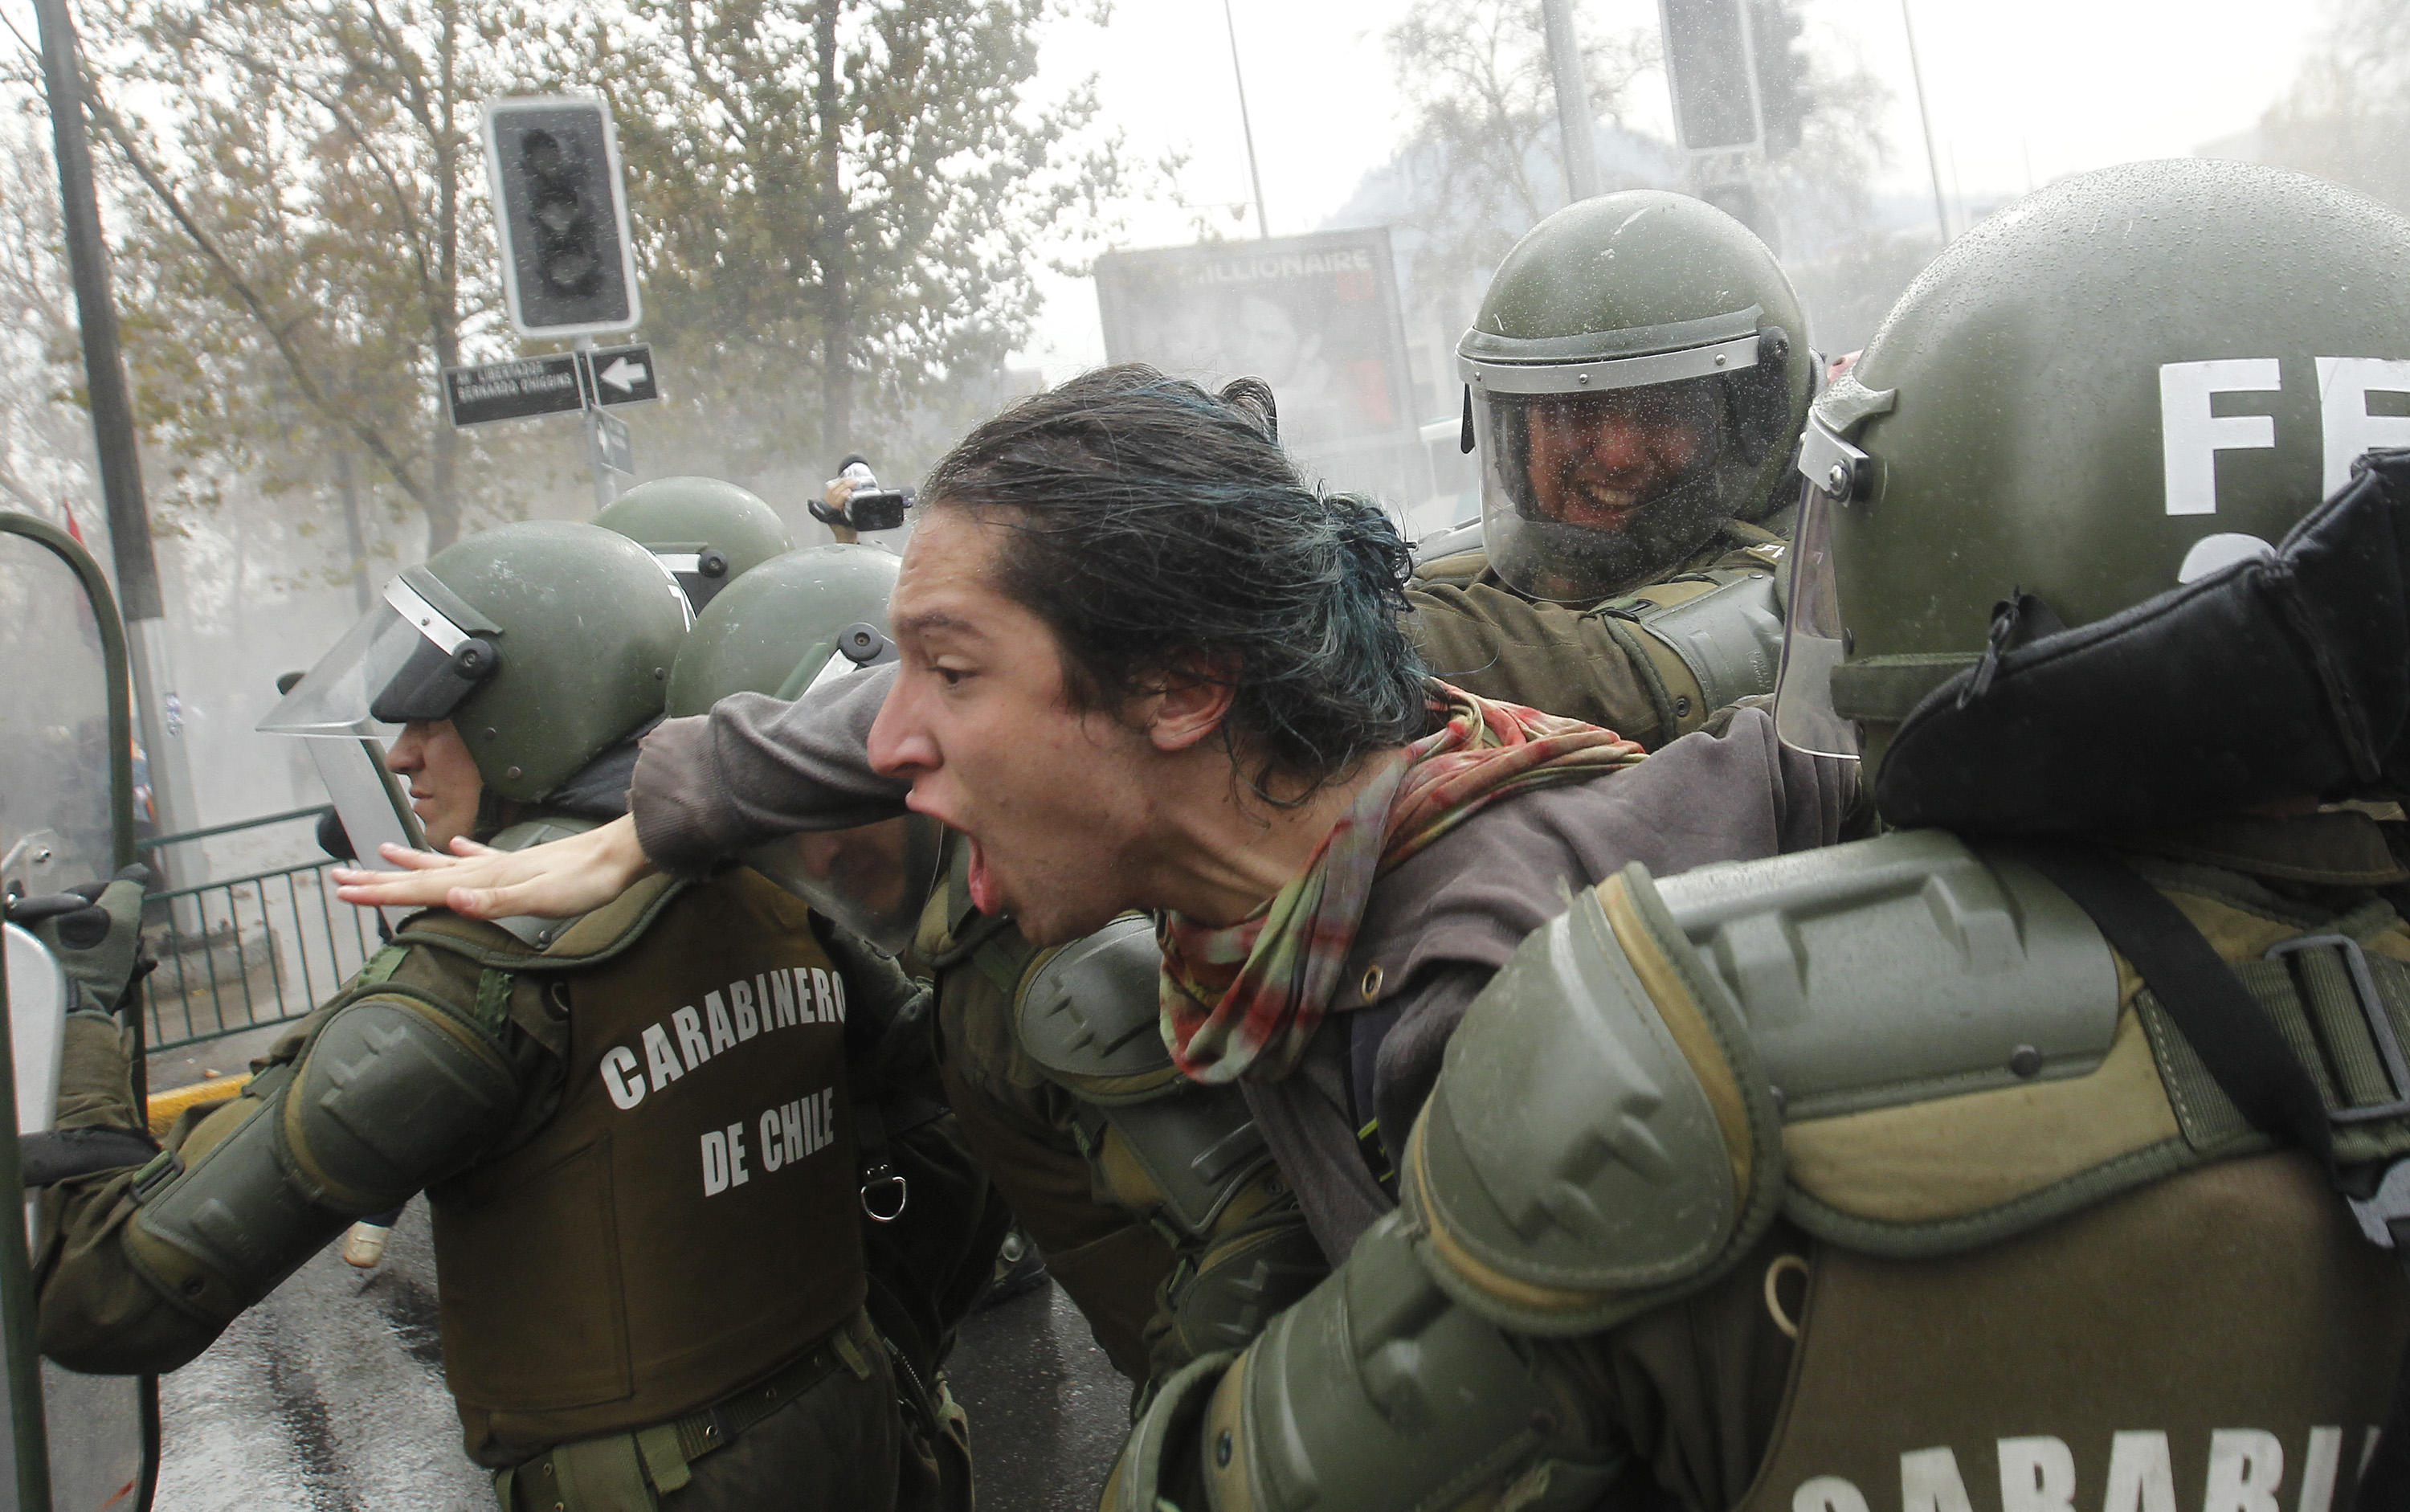 Riot police arrest a student during a march held to protest the slow pace of educational reform, in Santiago, on May 26, 2016 (Claudio Reyes—AFP/Getty Images)